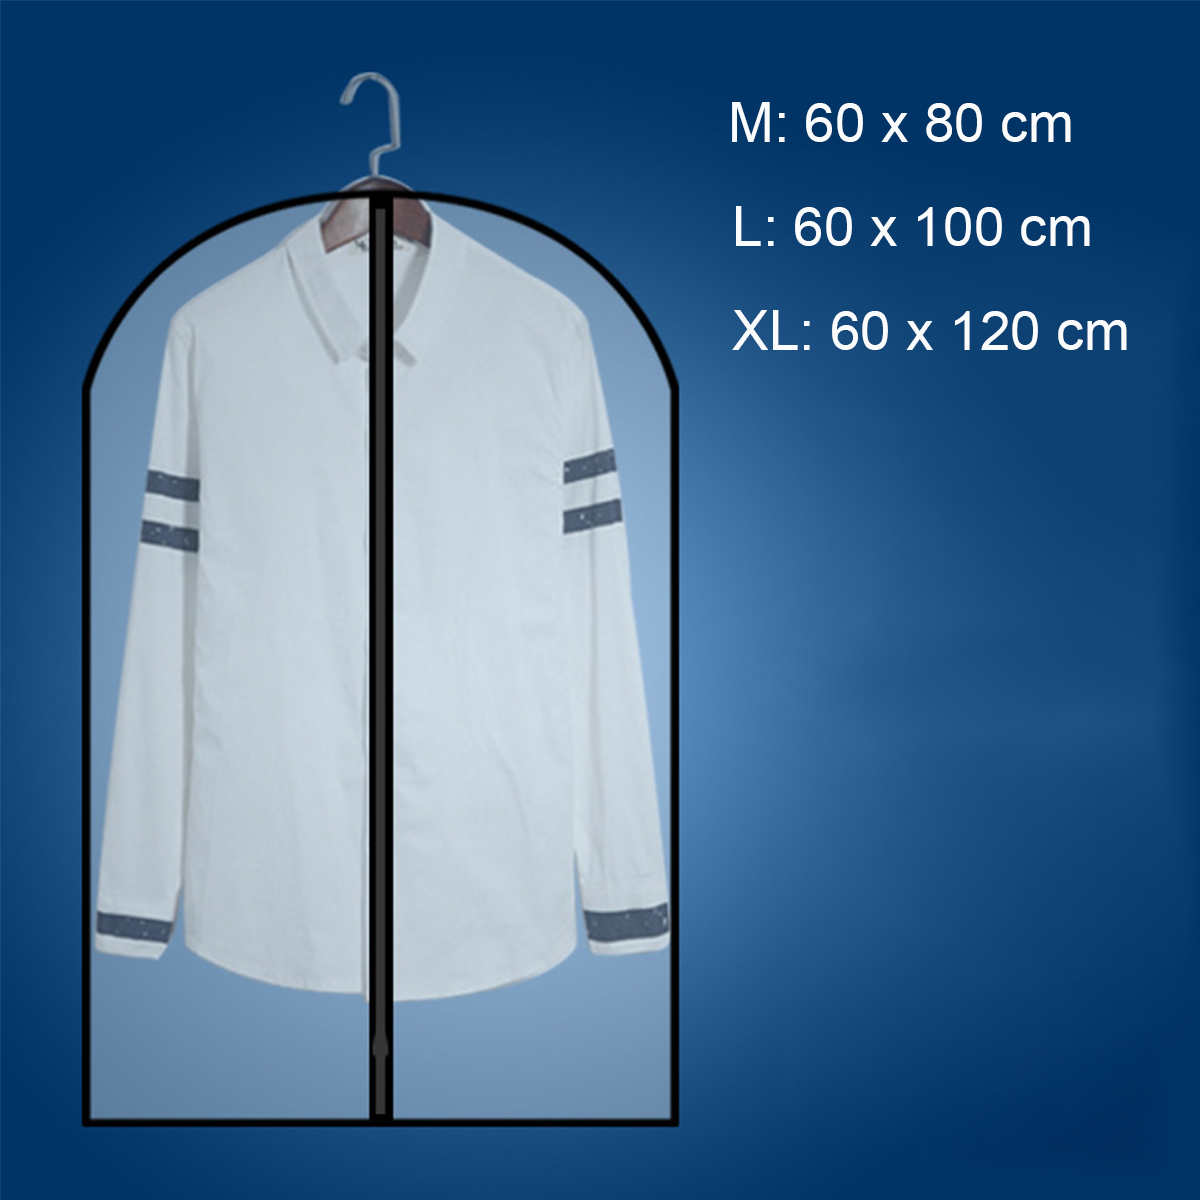 Plastic-Clothing-Covers-Clear-Dust-proof-Cloth-Cover-Suit-Dress-Clothes-Bag-Storage-Protector-1559752-4